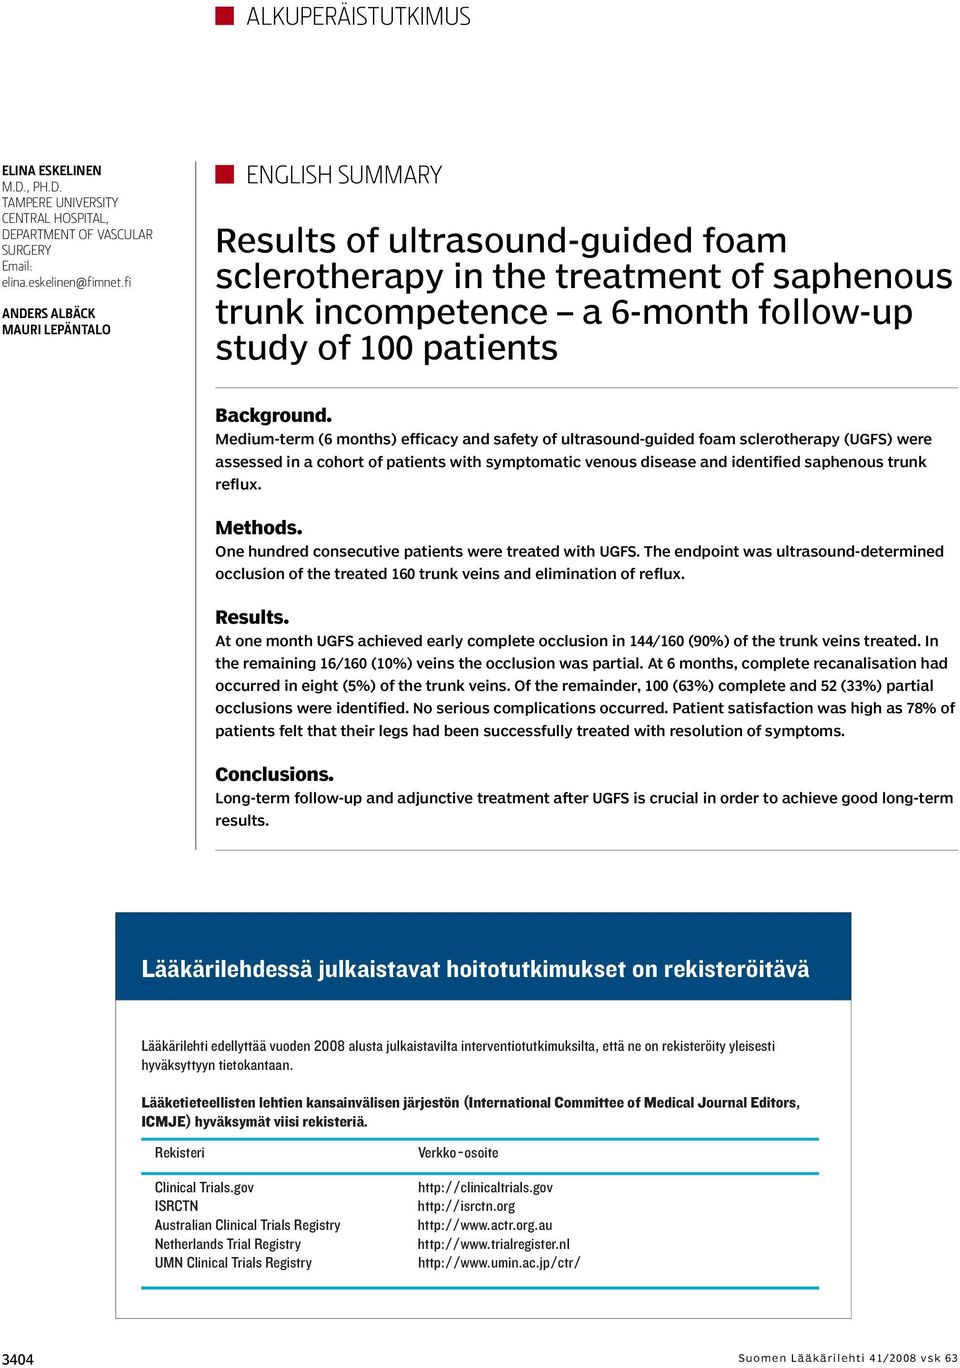 Medium-term (6 months) efficacy and safety of ultrasound-guided foam sclerotherapy (UGFS) were assessed in a cohort of patients with symptomatic venous disease and identified saphenous trunk reflux.